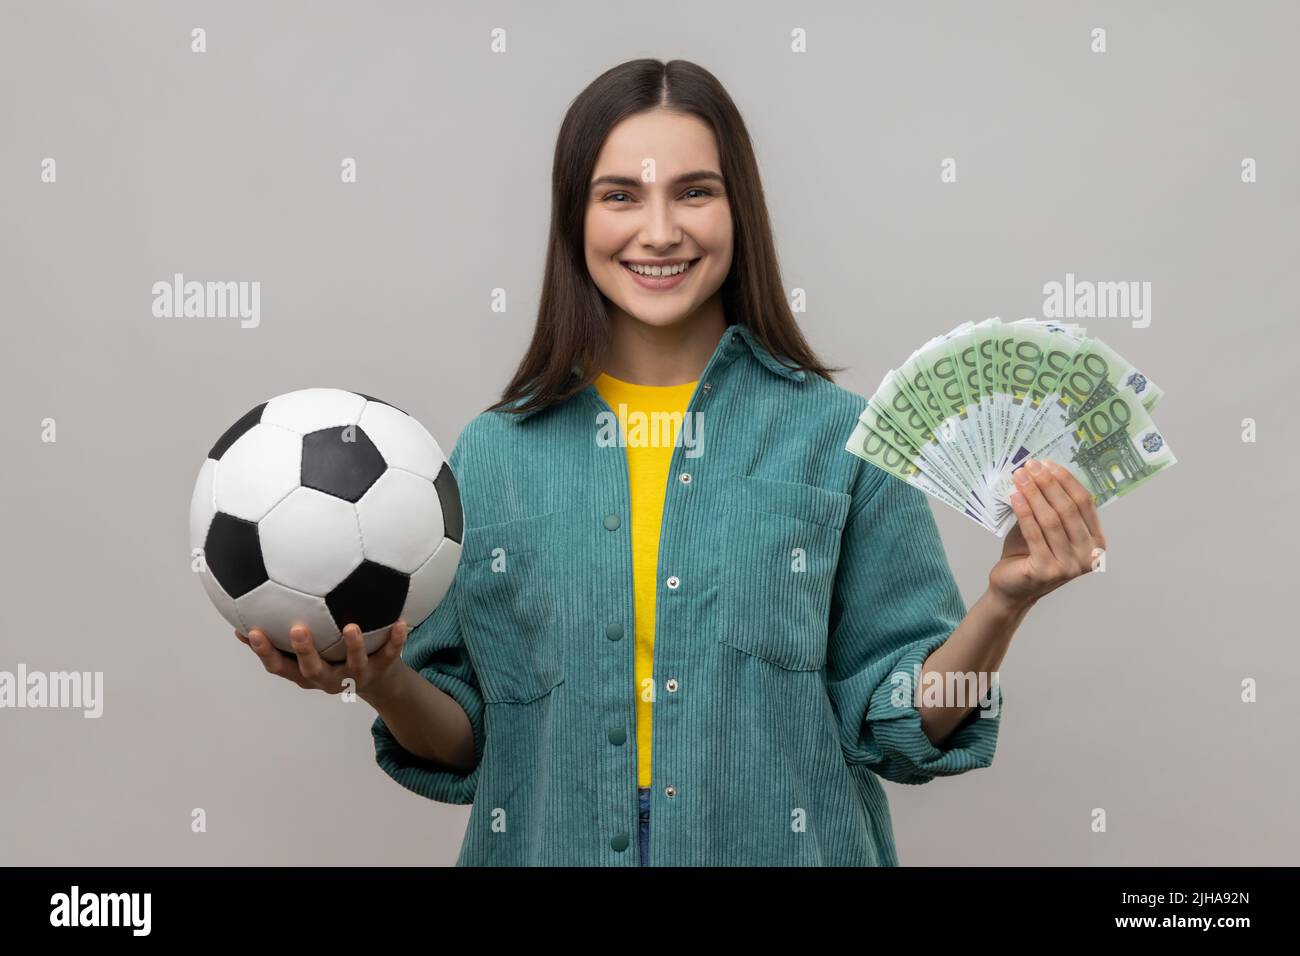 Portrait of satisfied woman showing soccer ball and fun of hundred euro bills, winning lot of money betting for sport, wearing casual style jacket. Indoor studio shot isolated on gray background. Stock Photo